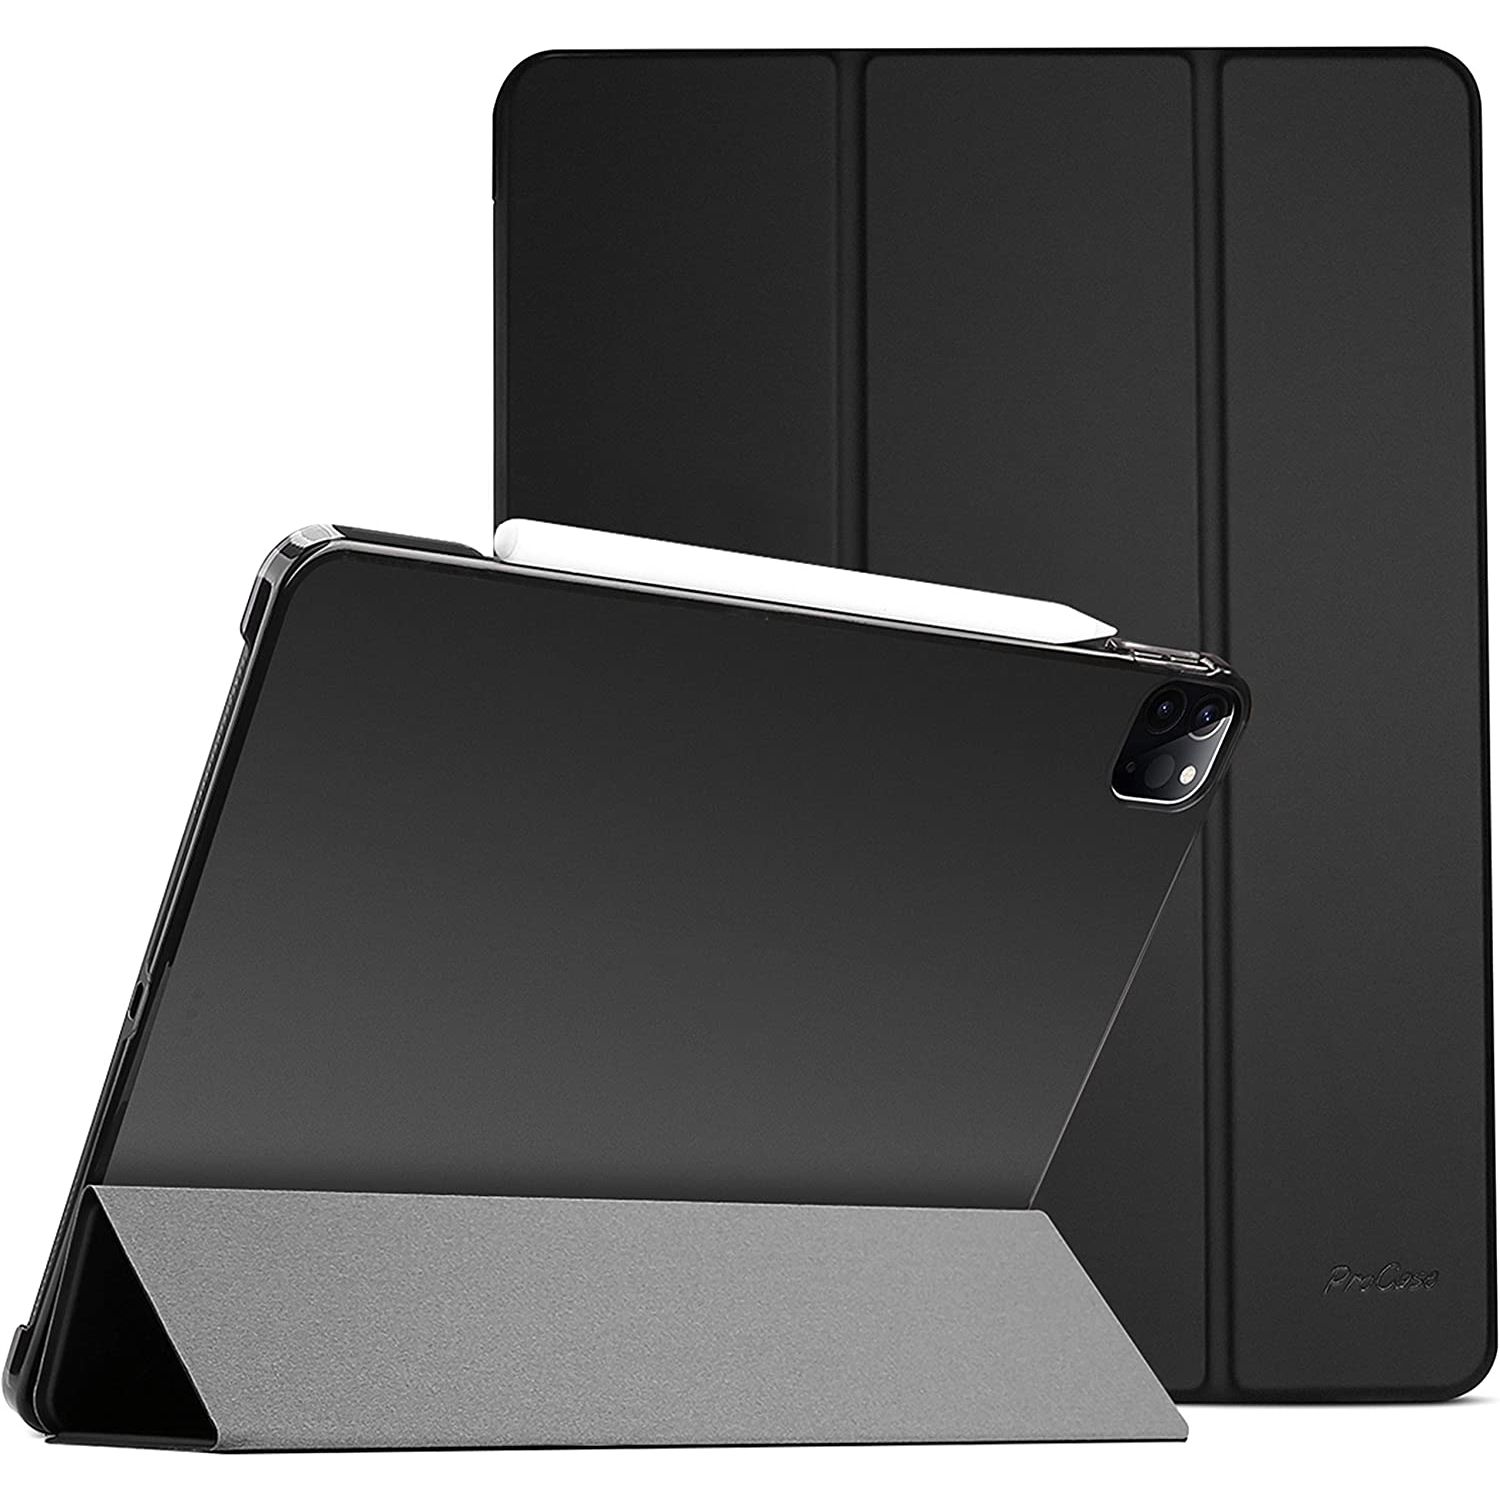 Render of the ProCase Smart Cover for 11-inch iPad Pro